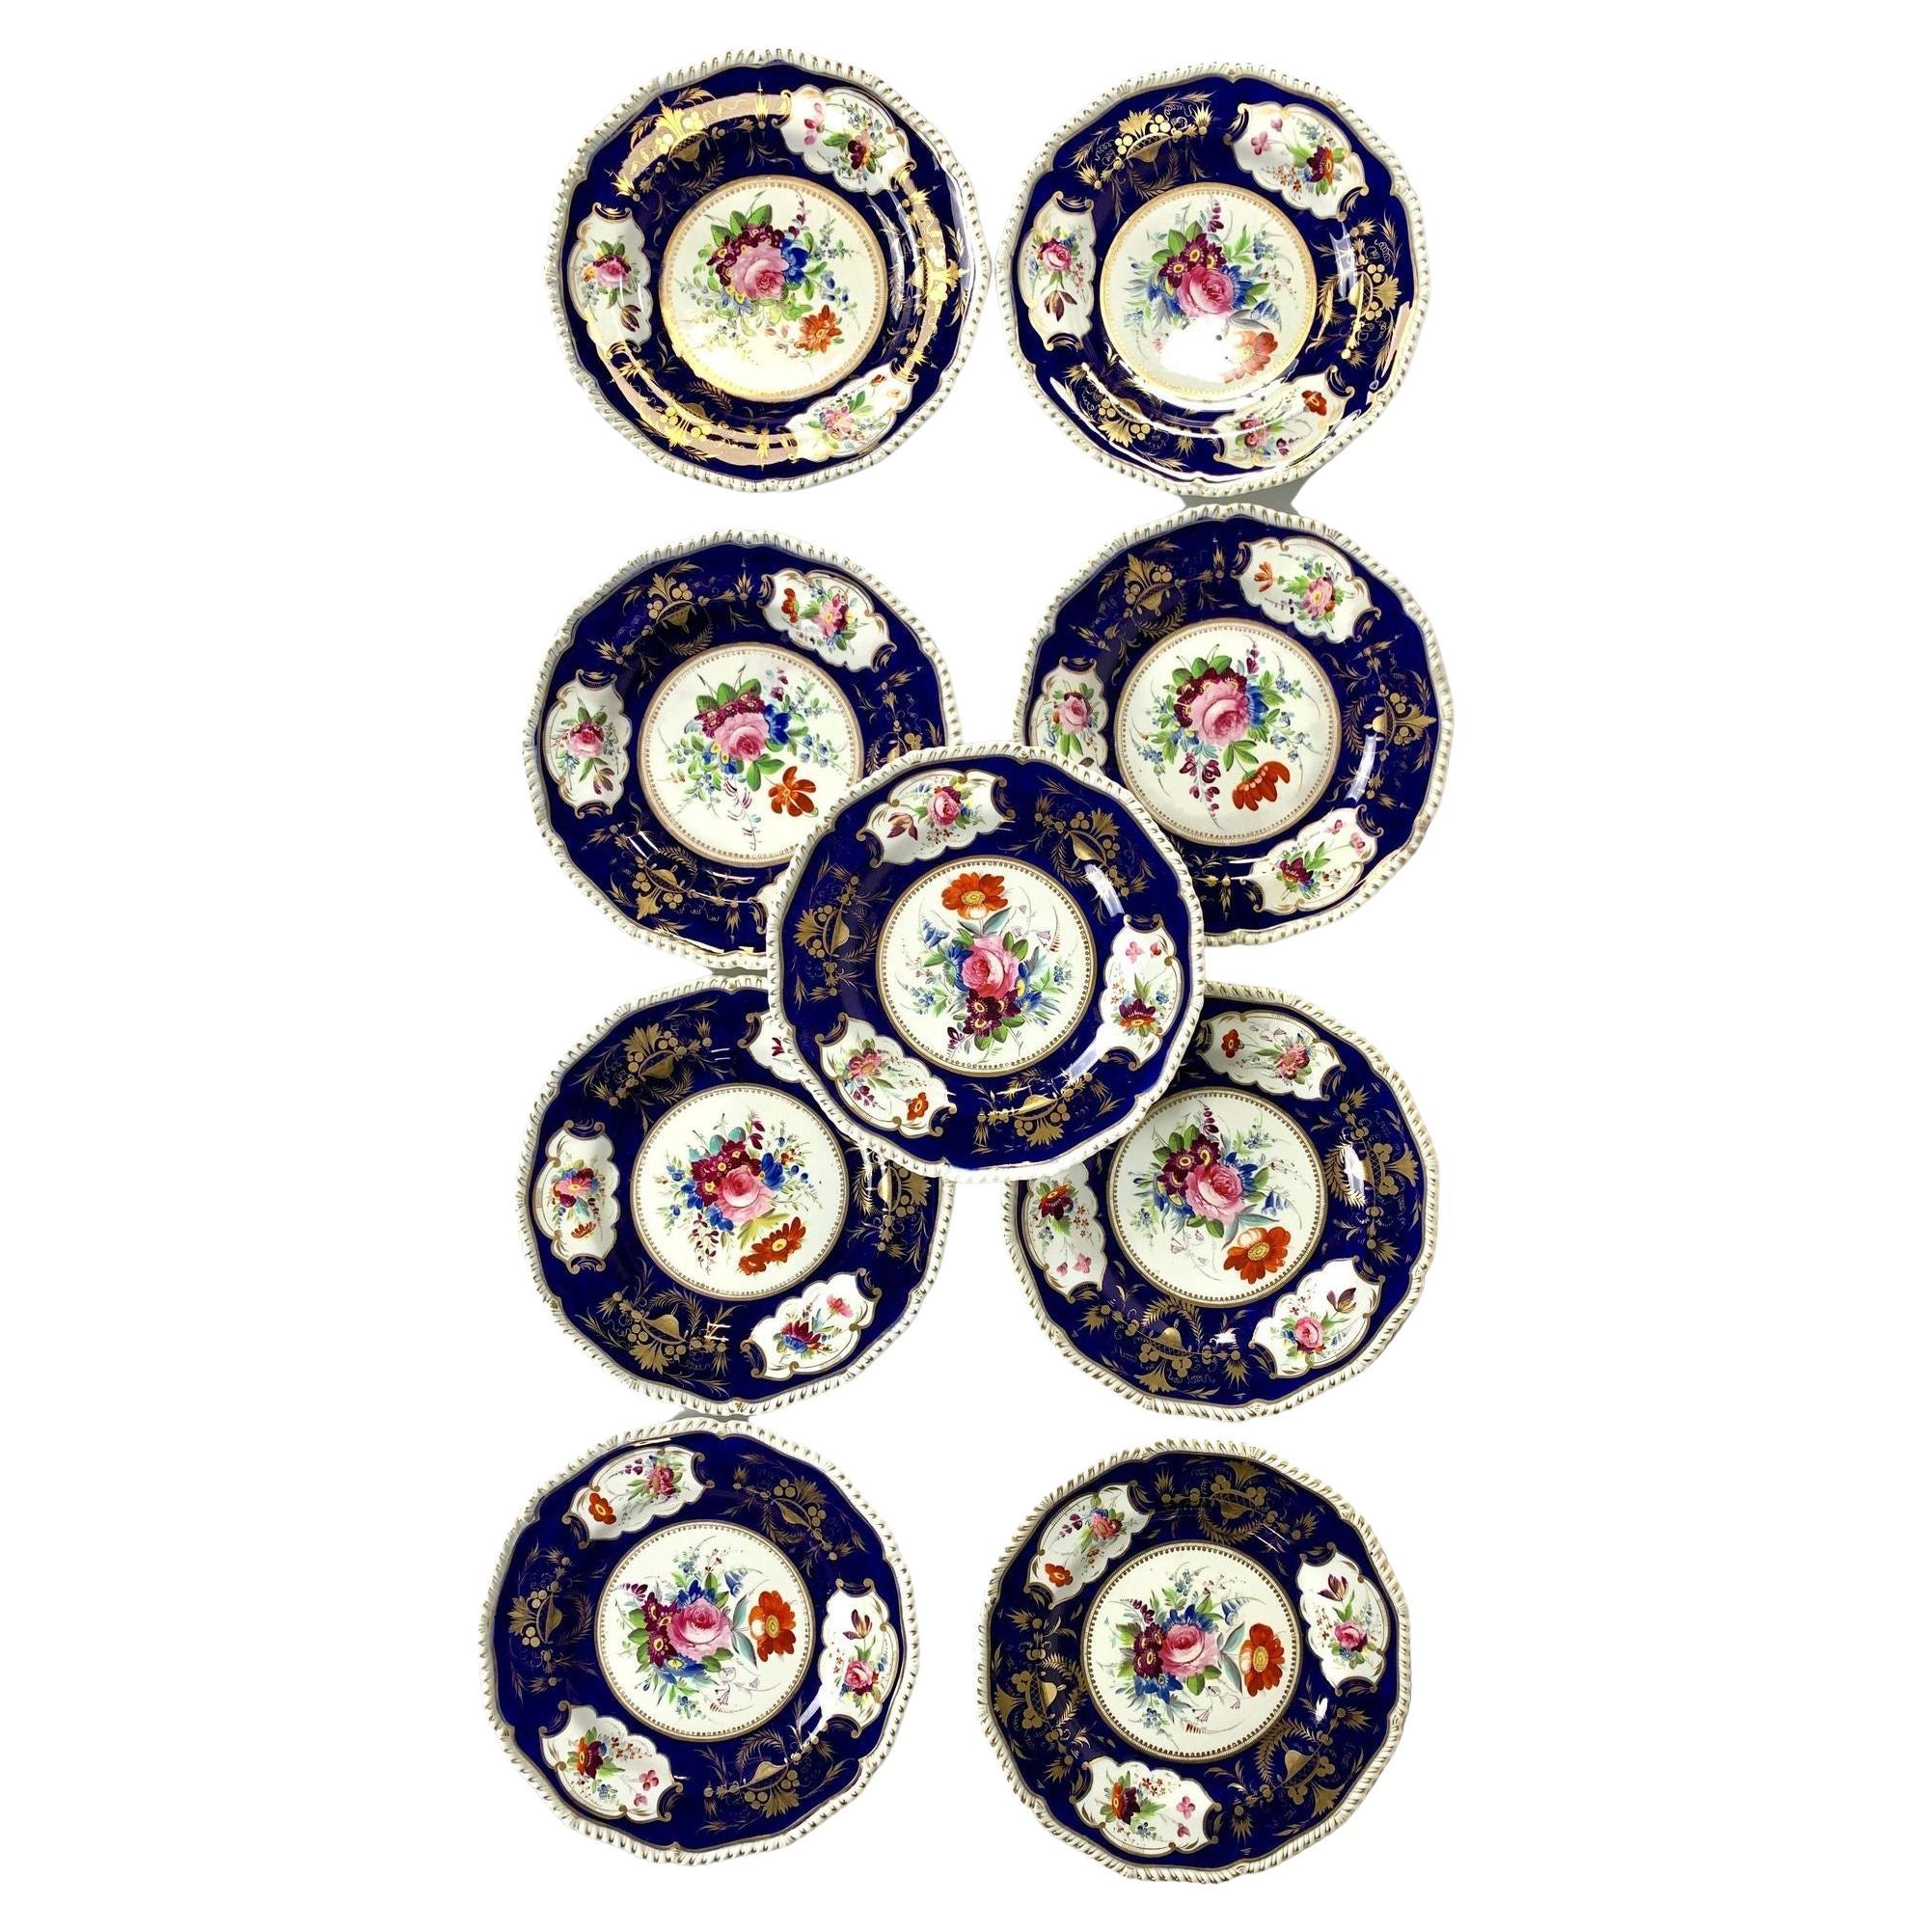 Each plate in this set of ten Derby dinner plates was hand painted with exquisite flowers in England circa 1825-1830.
In the center of each plate, we see a loose bouquet of flowers, including pink roses, purple and yellow auricula,
blue